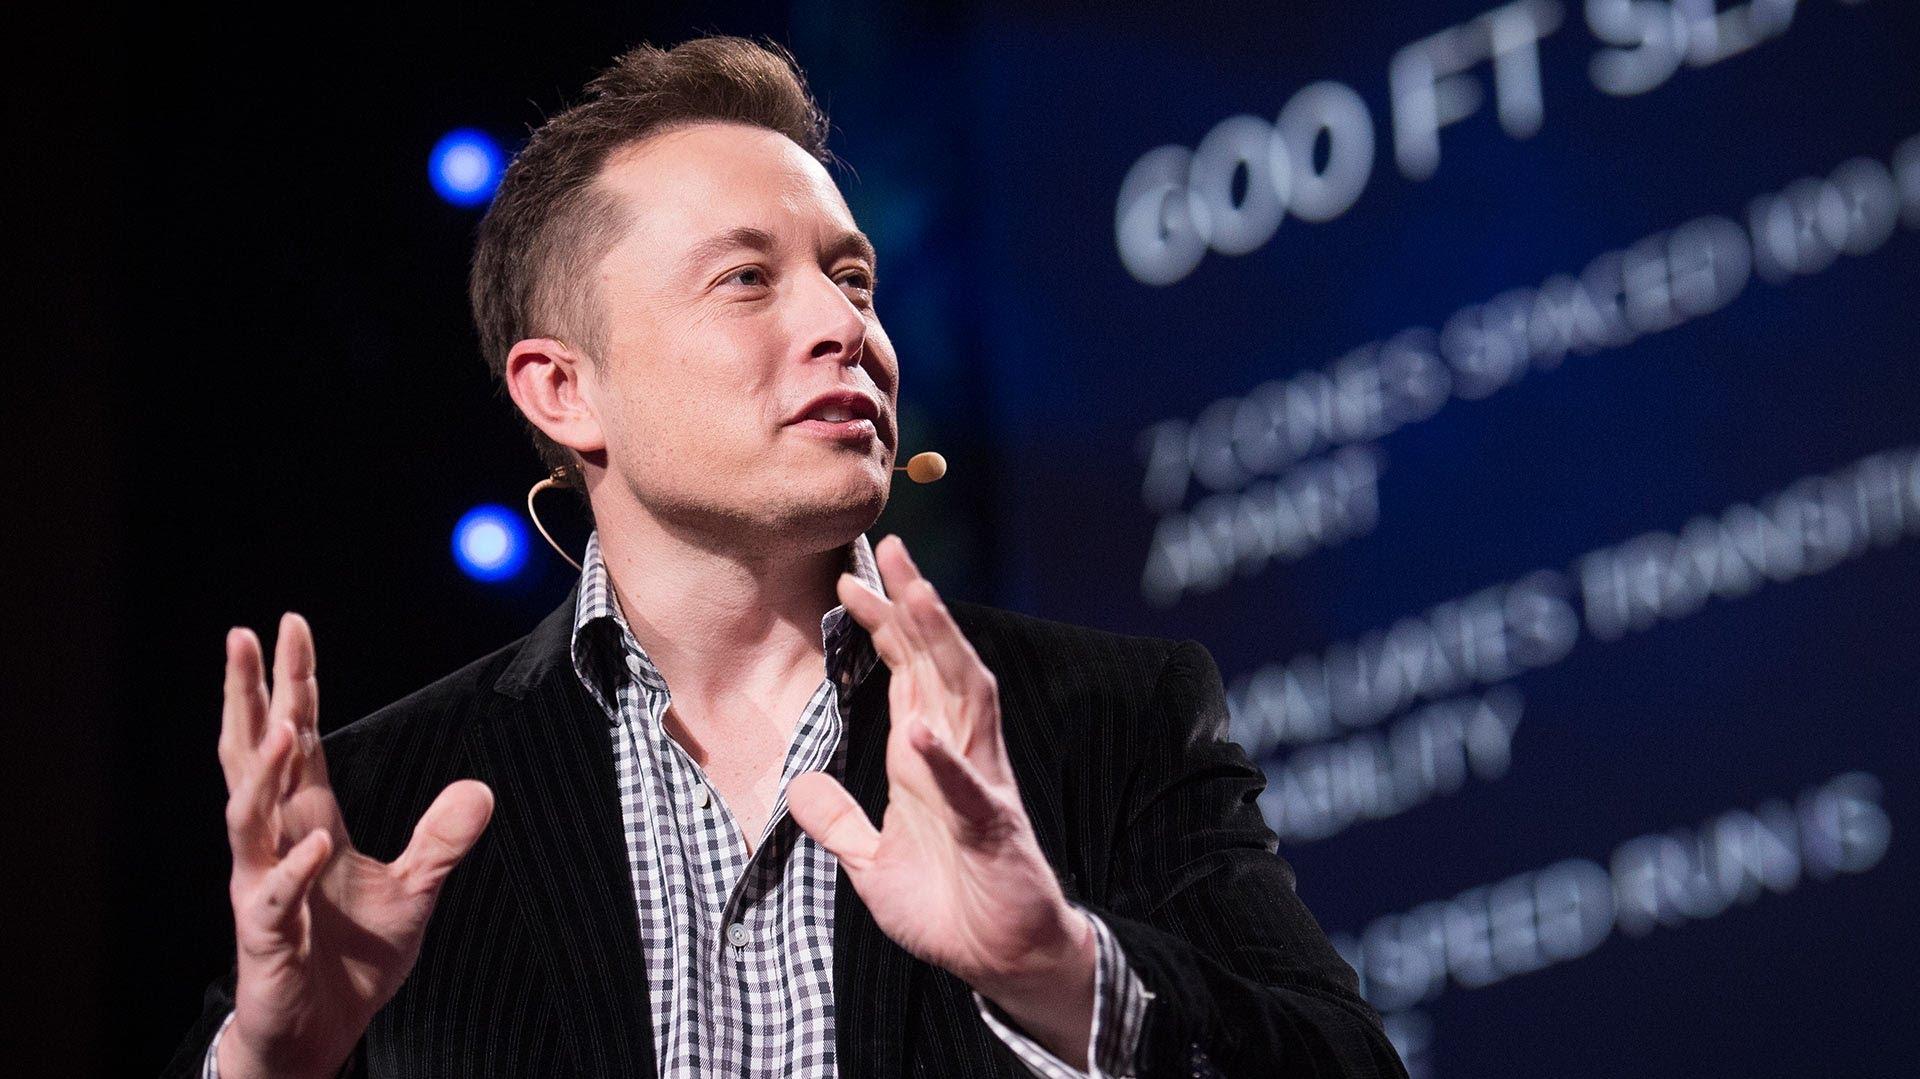 Top Tips On How To Work Like Elon Musk And Be That Model Employee